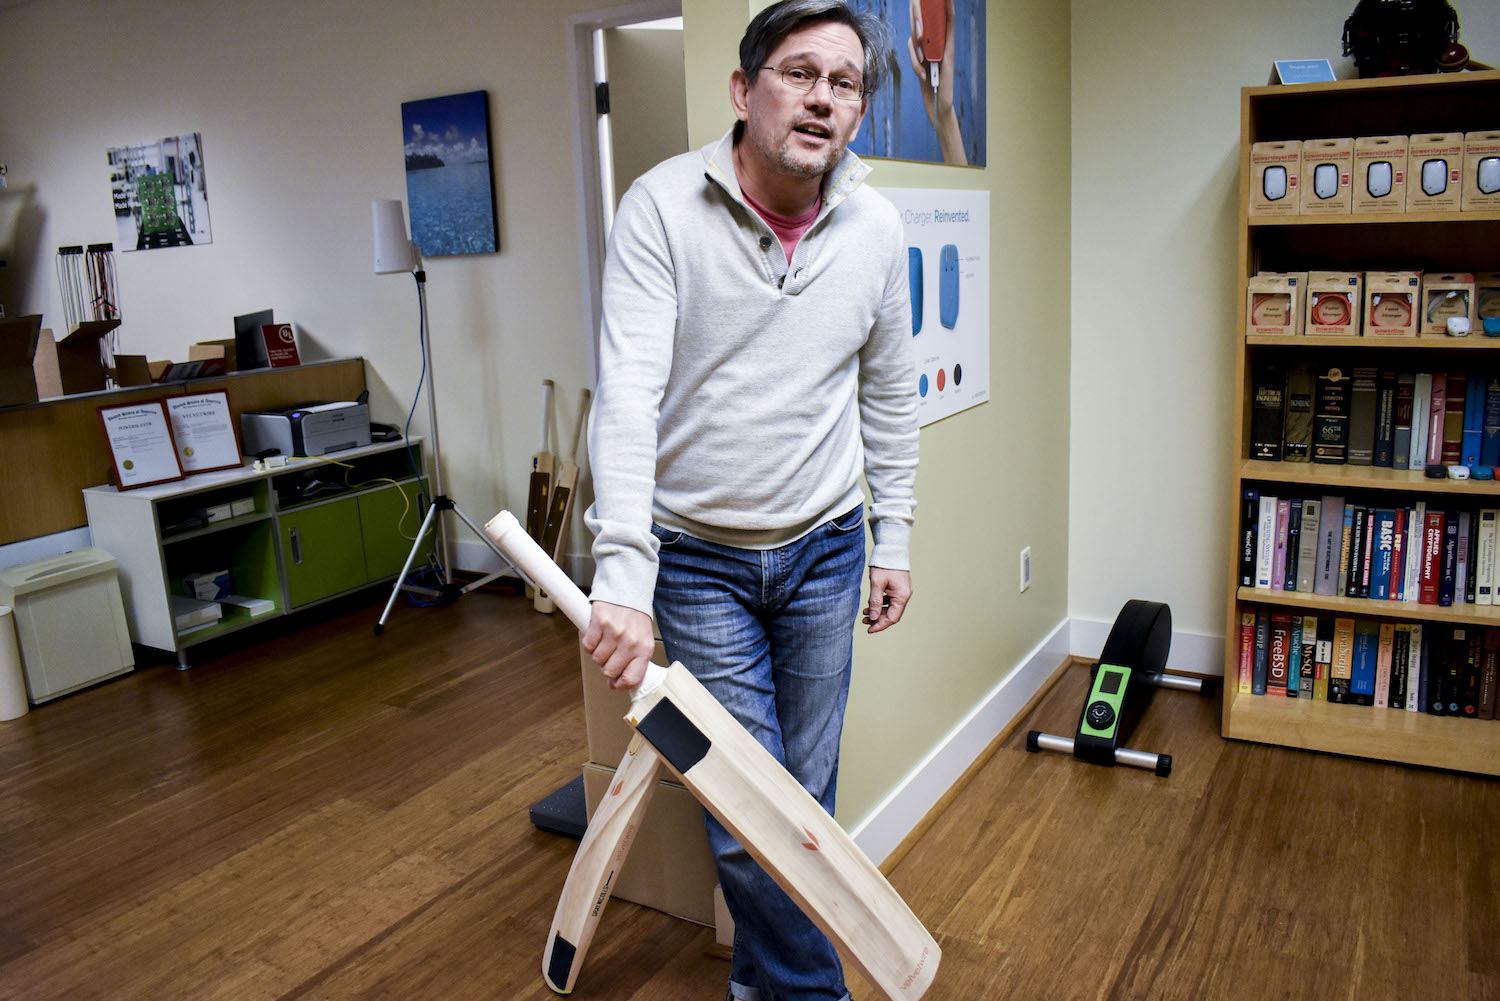 Velvetwire's Eric Bodnar poses with a sensor-clad cricket bat. The technology that measures the velocity of a swing may also be able to track the flow of bulk goods from a dispenser. (April 2020)